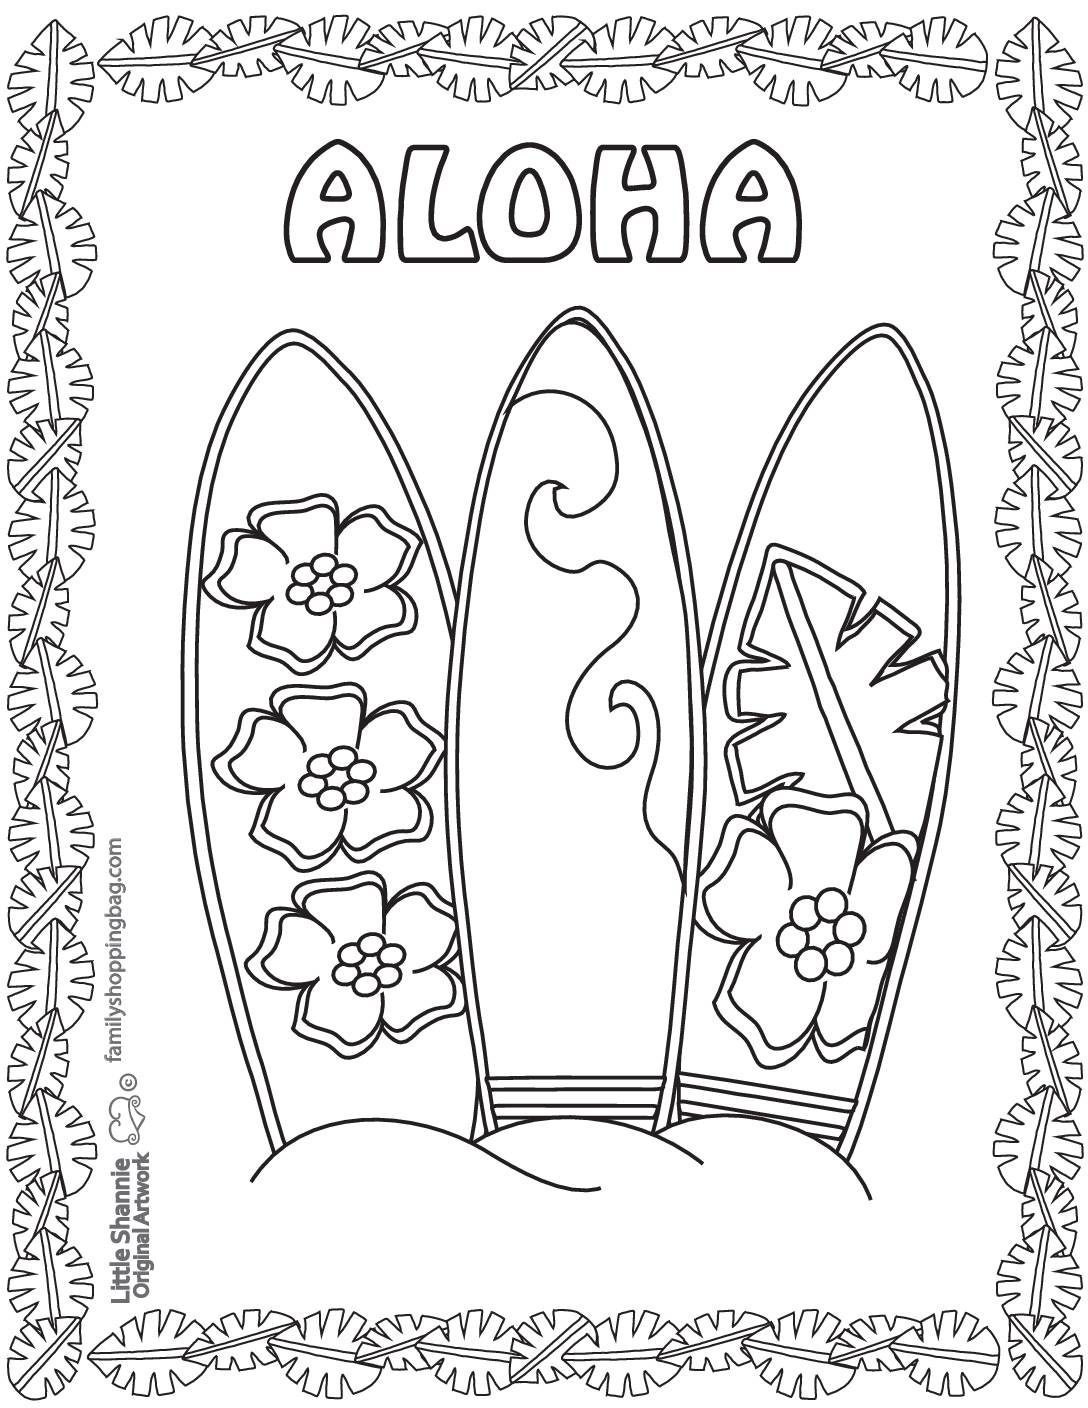 luau-party-coloring-pages